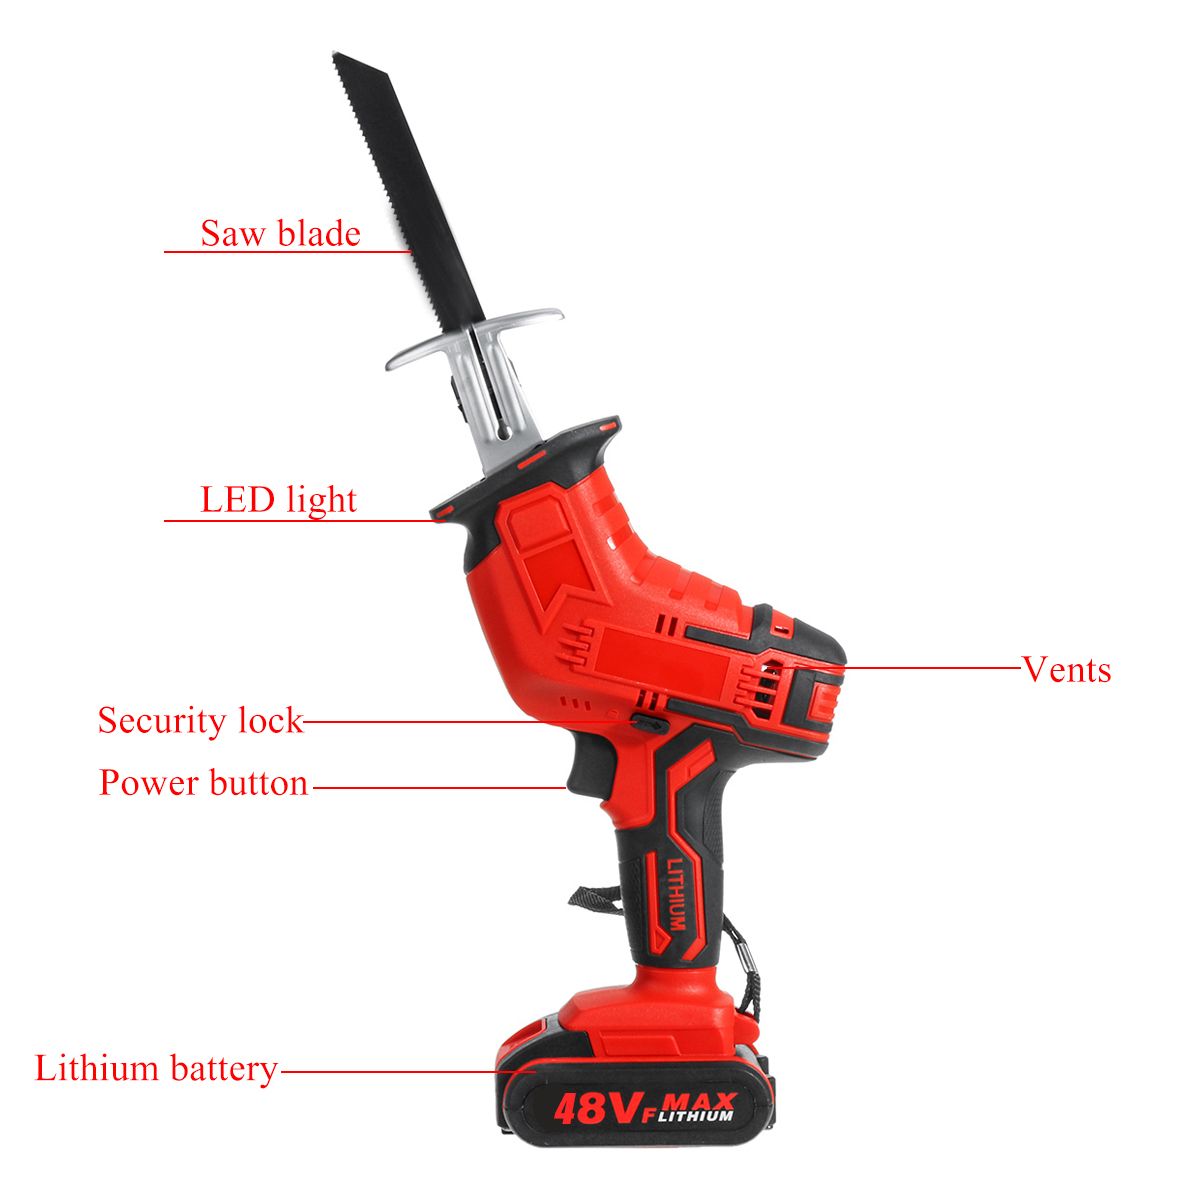 48V-2-Lithium-Battery-Wireless-Charging-Reciprocating-Saw-Wood-Metal-Cutter-Kit-1671503